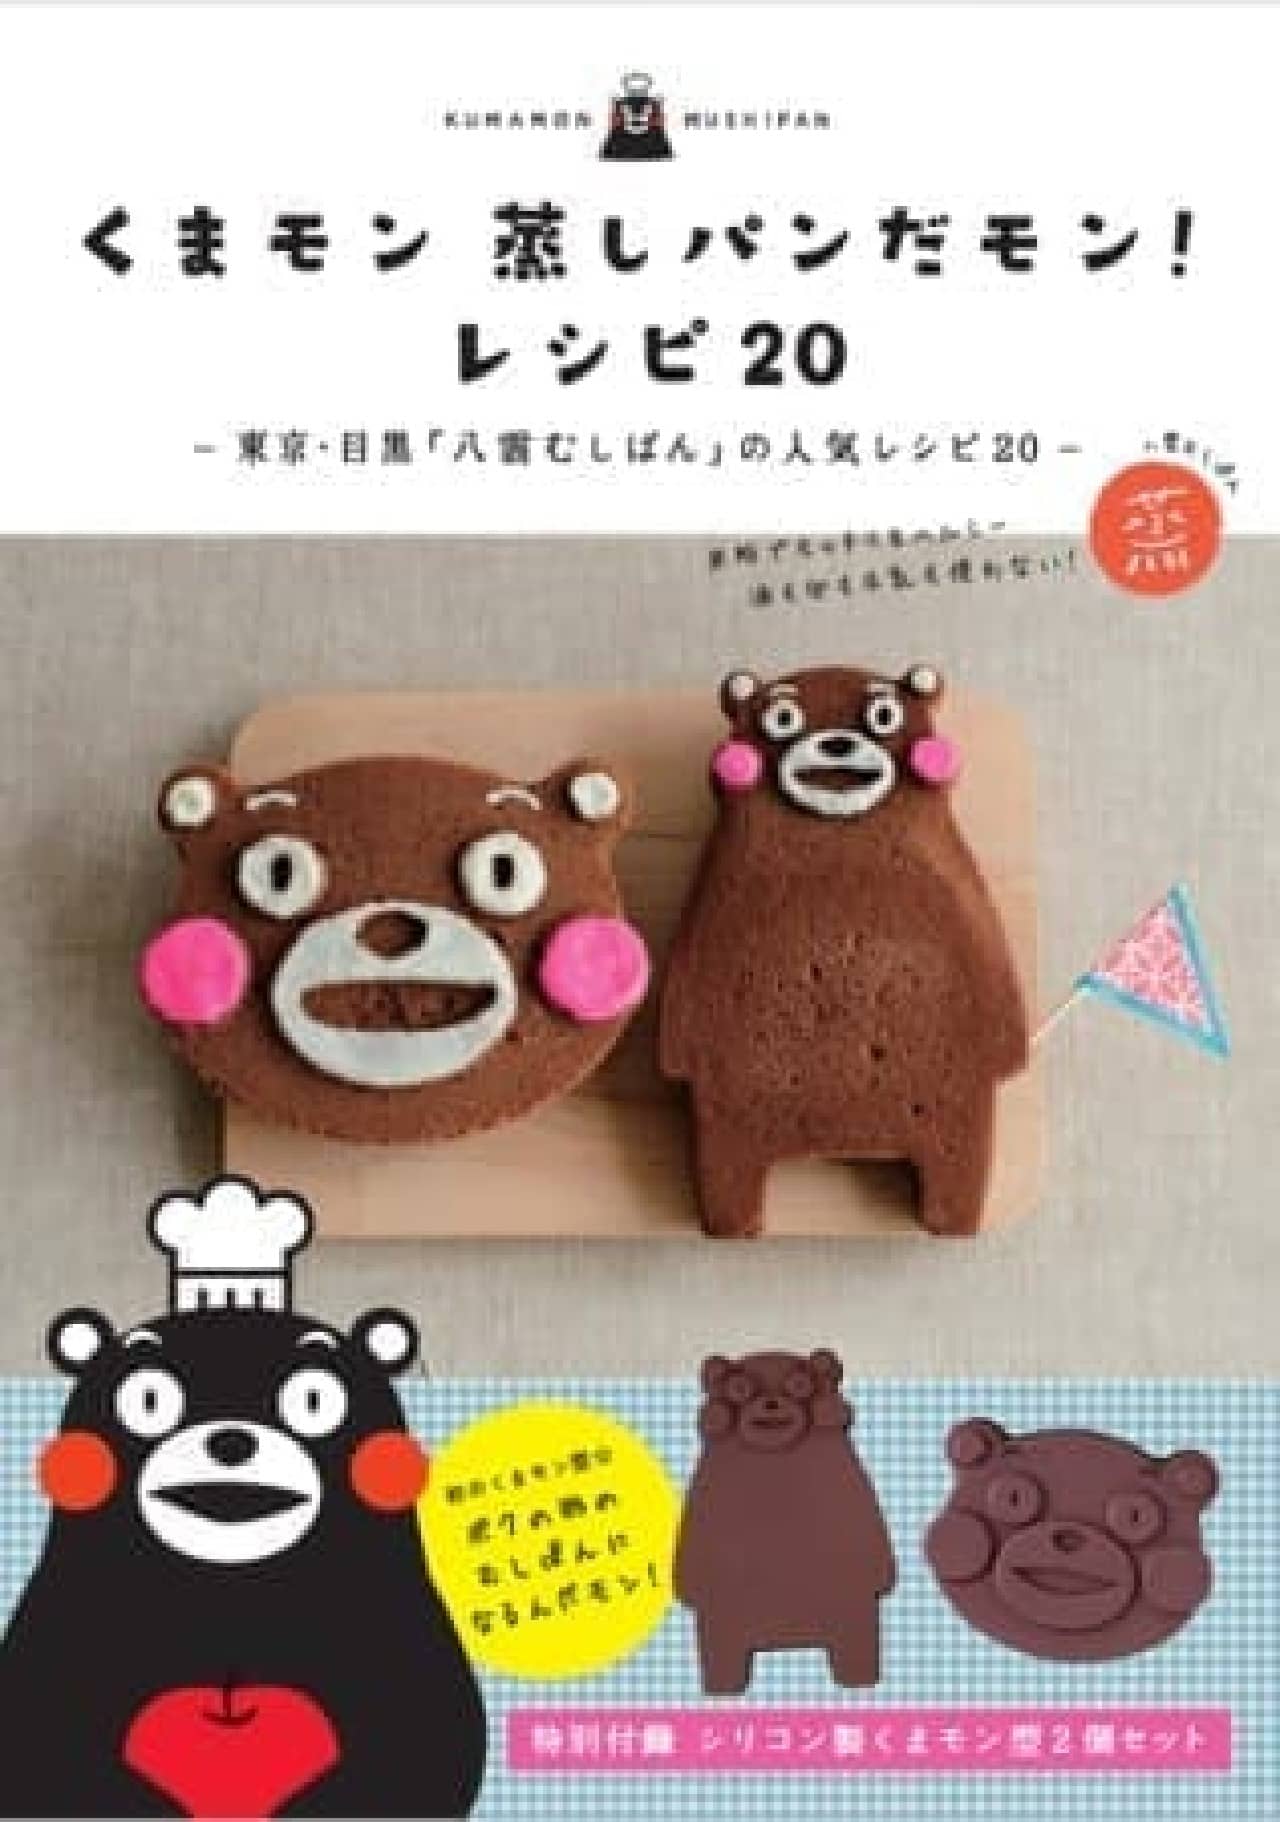 You can make Kumamon's "steamed bread"!